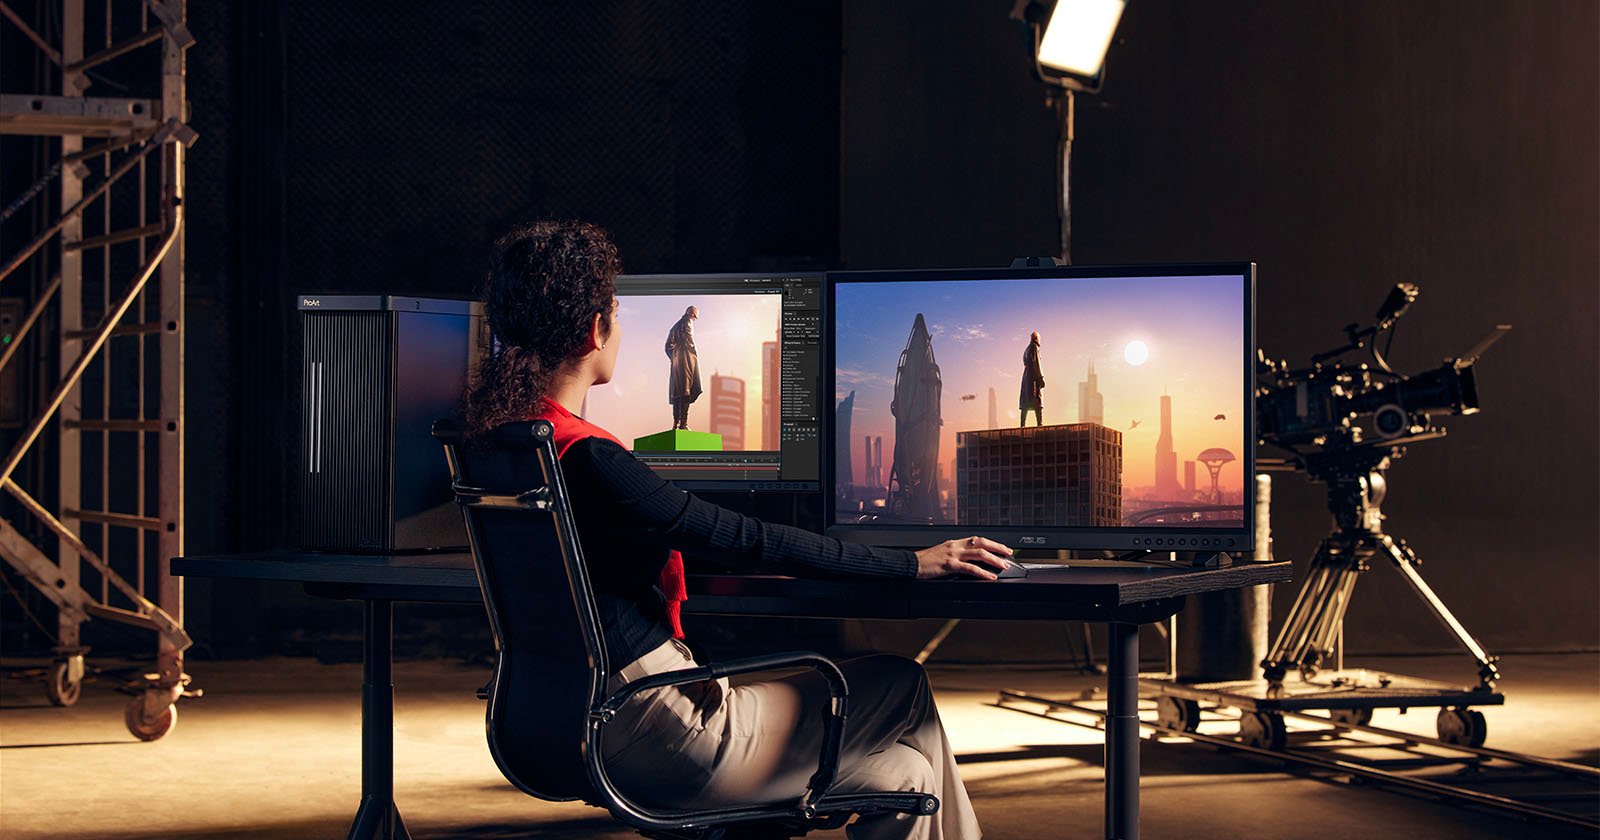 The Asus ProArt Station is a Pre-Built PC Made for Creative Professionals